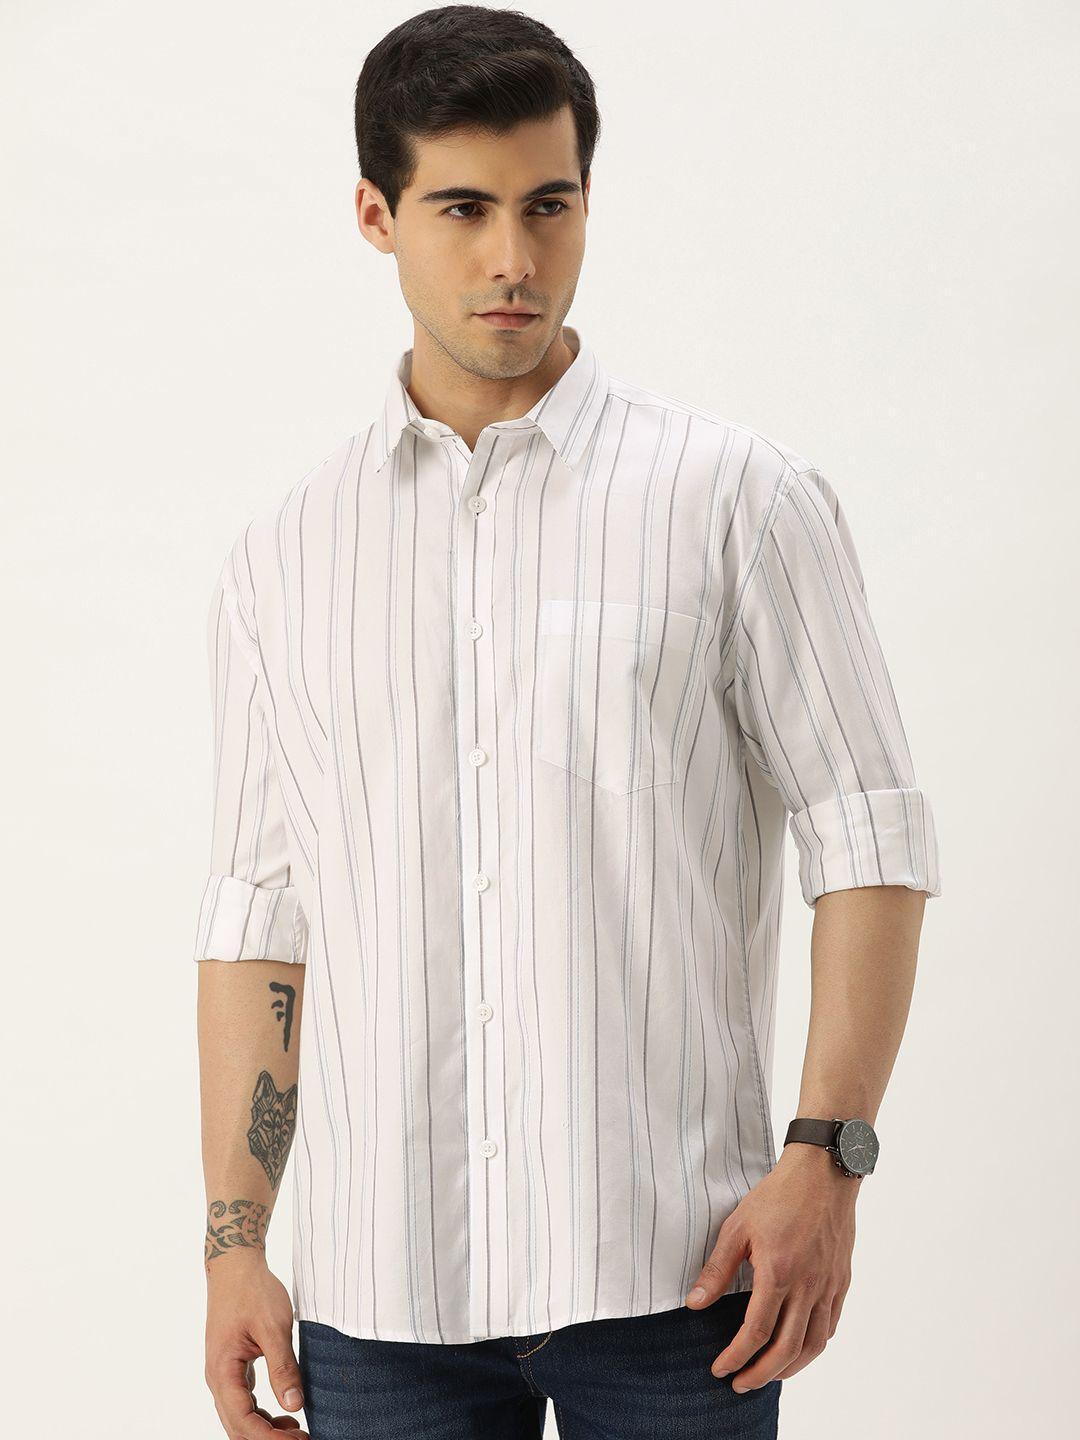 burnt umber comfort striped cotton casual shirt